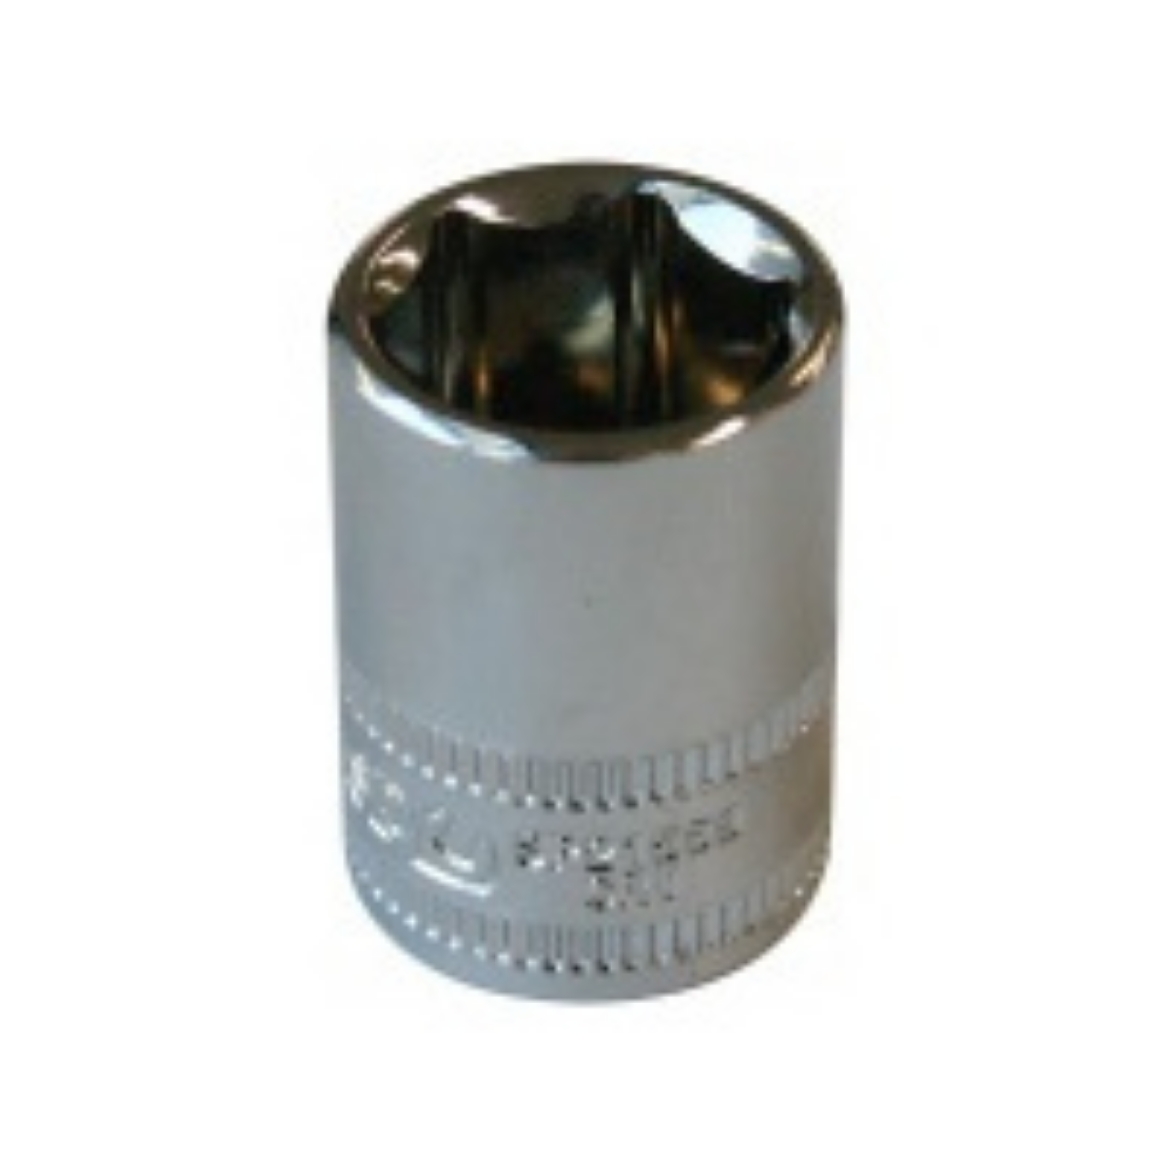 Picture of SOCKET 1/4"DR 6PT METRIC 10MM SP TOOLS